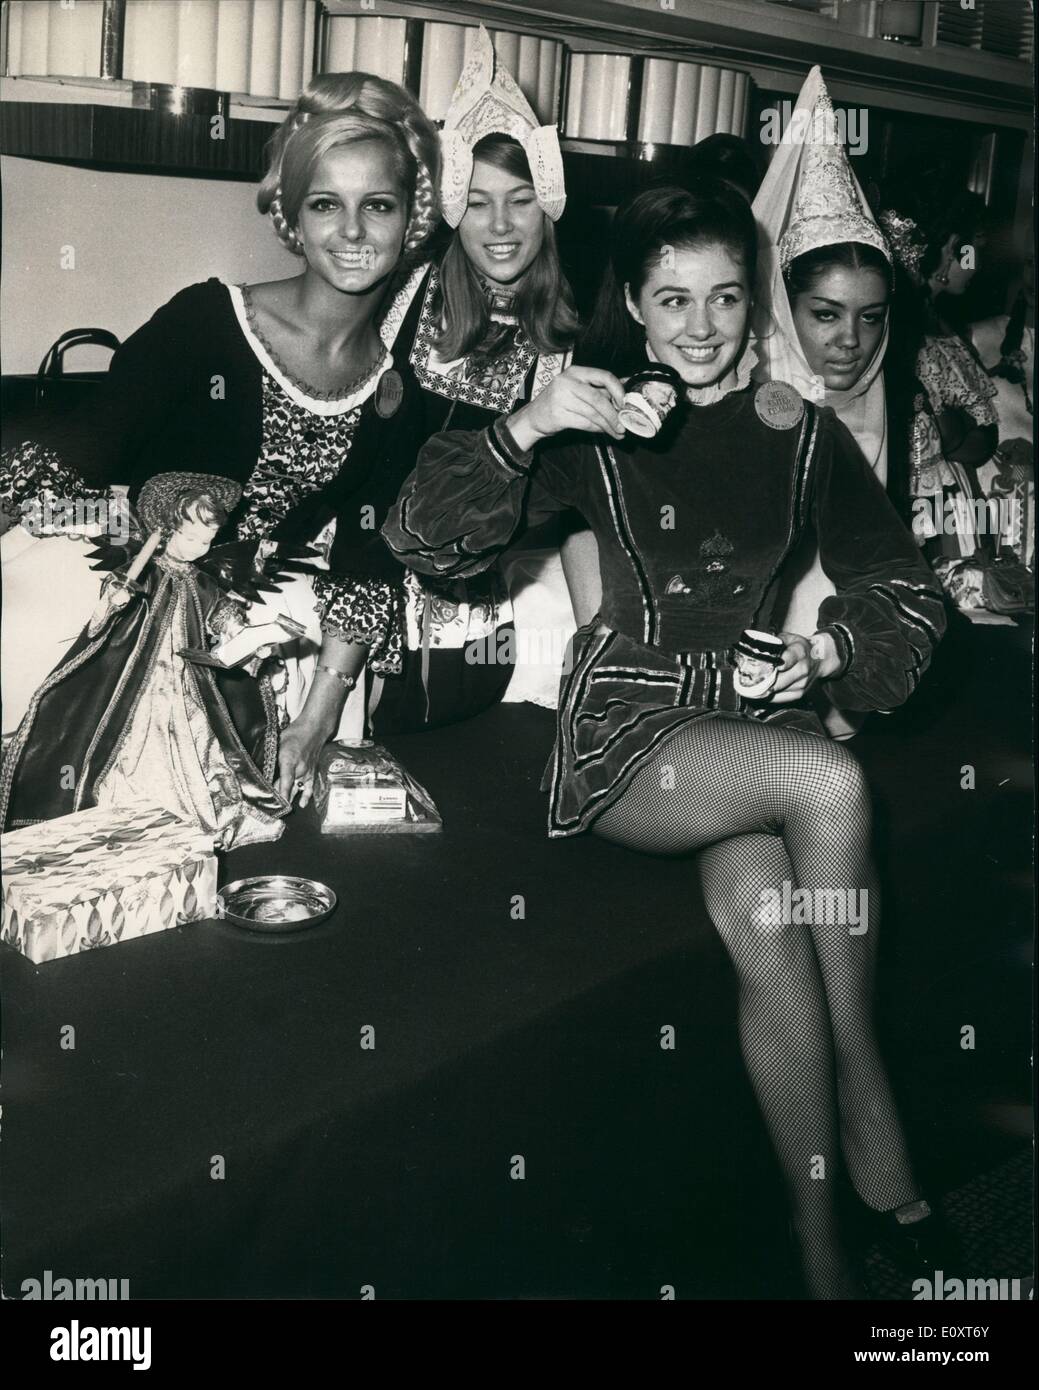 Nov. 11, 1967 - International Beauty Queens Attend The Variety Club's Luncheon At The Savoy Hotel:the International beauty Queens who are competing in the ''Miss World'' contest, today attended a luncheon given by the Variety Club of Great Britain at the Savor Hotel, Each of the girls brought gifts from their own countries to be used to raise funds for the sick and needy children Stock Photo